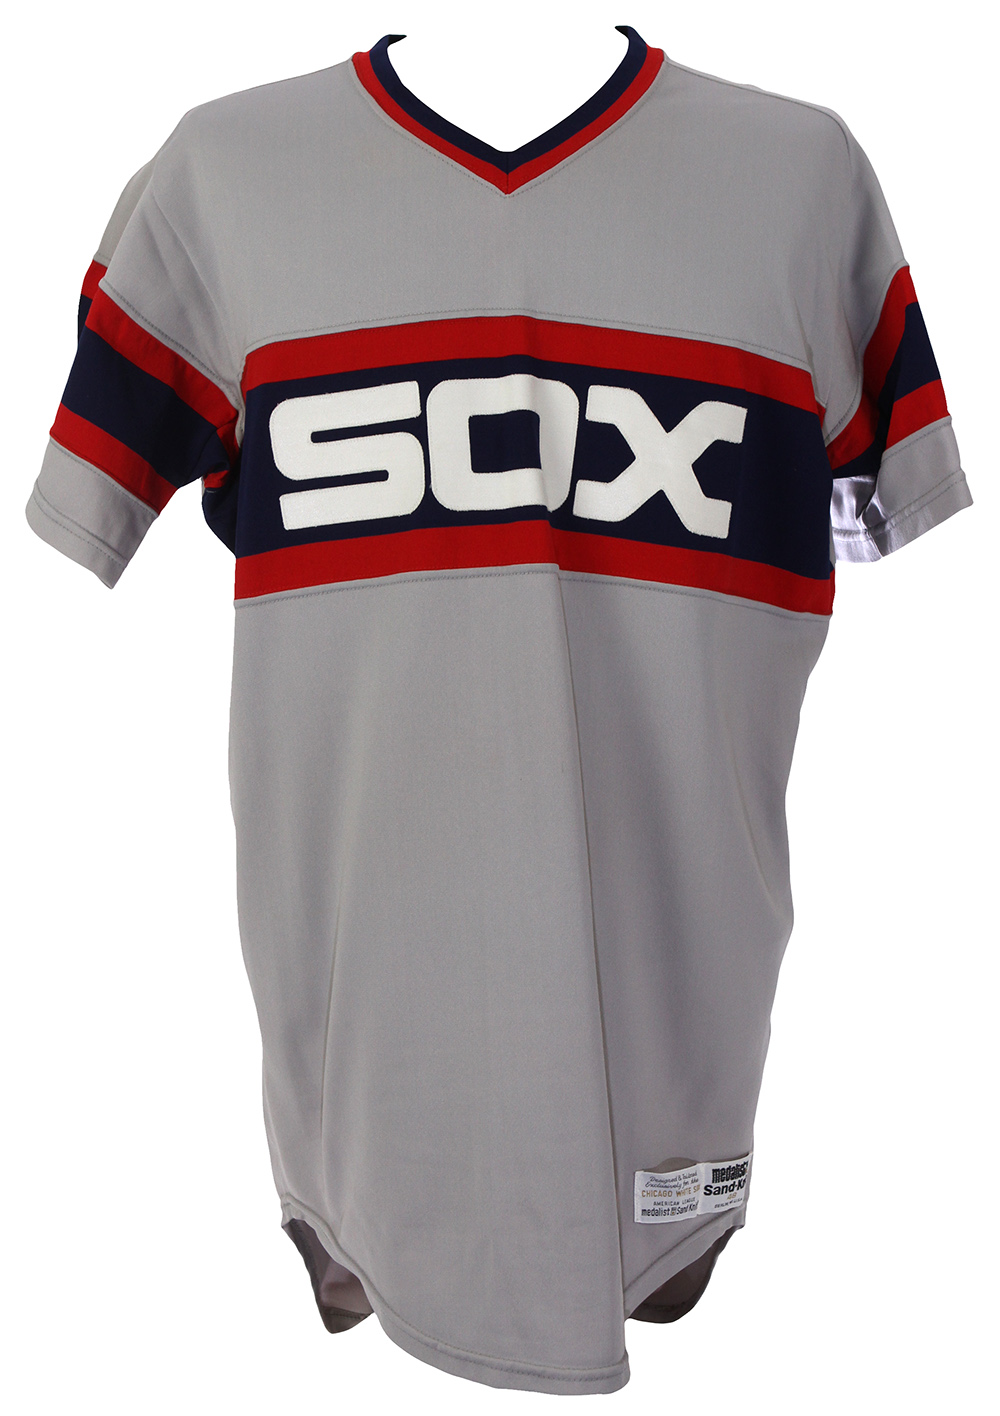 1983 white sox road jersey